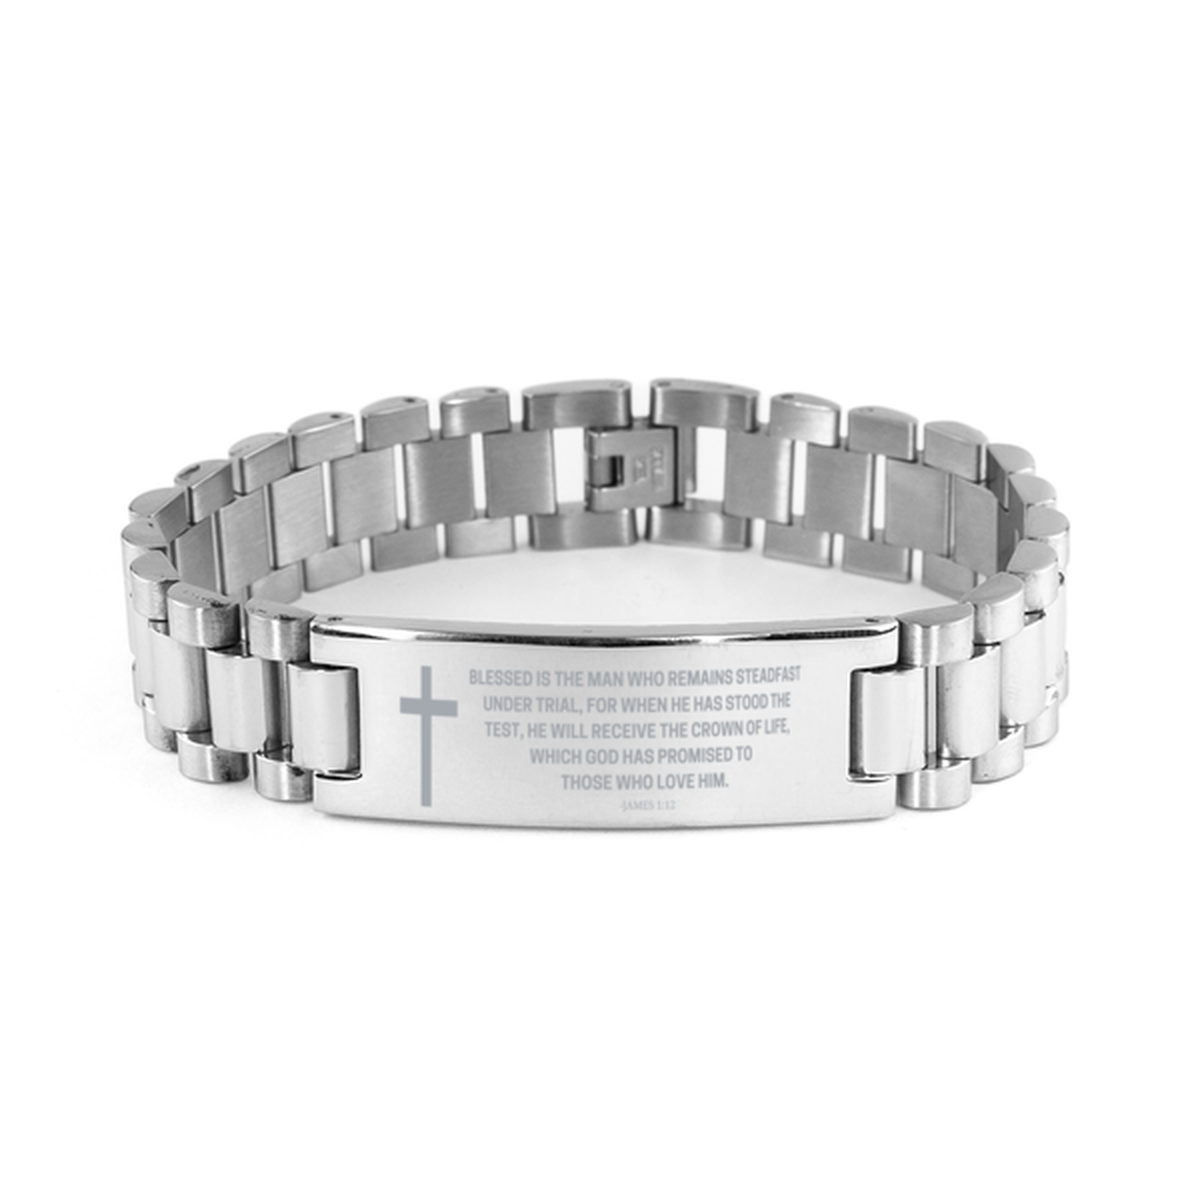 Baptism Gifts For Teenage Boys Girls, Christian Bible Verse Ladder Stainless Steel Bracelet, Blessed is the man who remains, Catholic Confirmation Gifts for Son, Godson, Grandson, Nephew